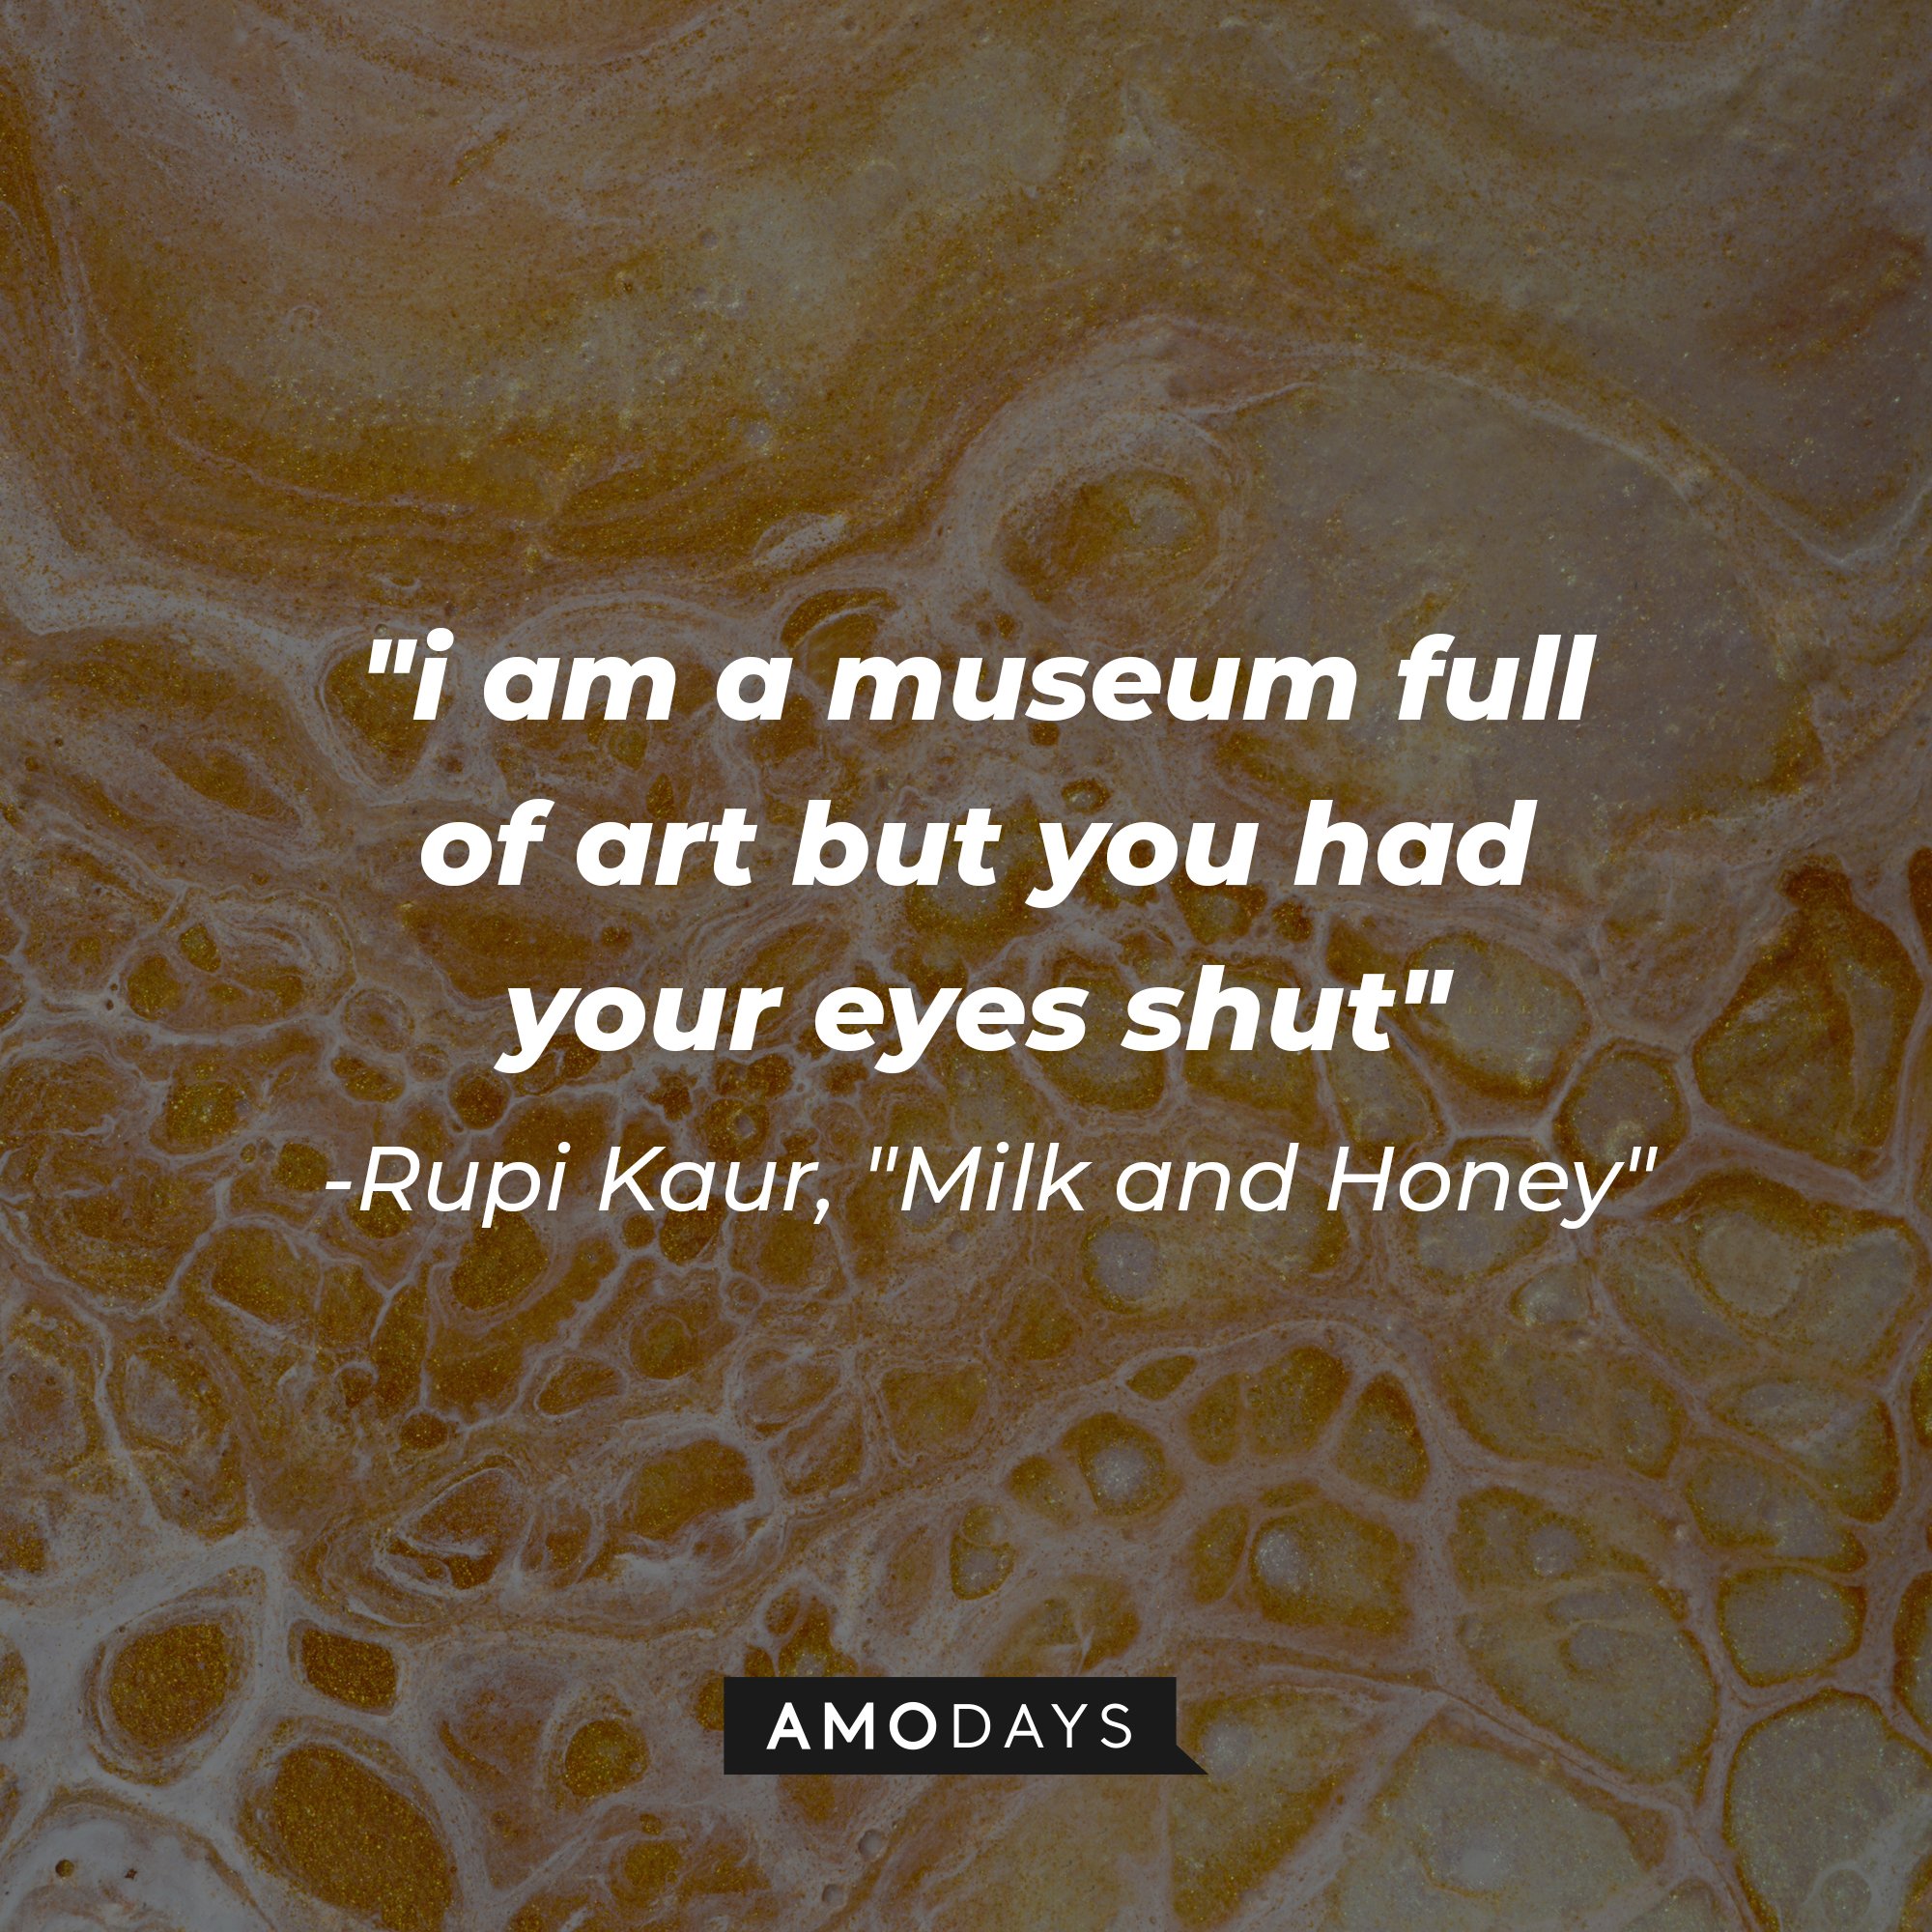 Rupi Kaur's "Milk and Honey" quote: "i am a museum full of art but you had your eyes shut" | Image: AmoDays